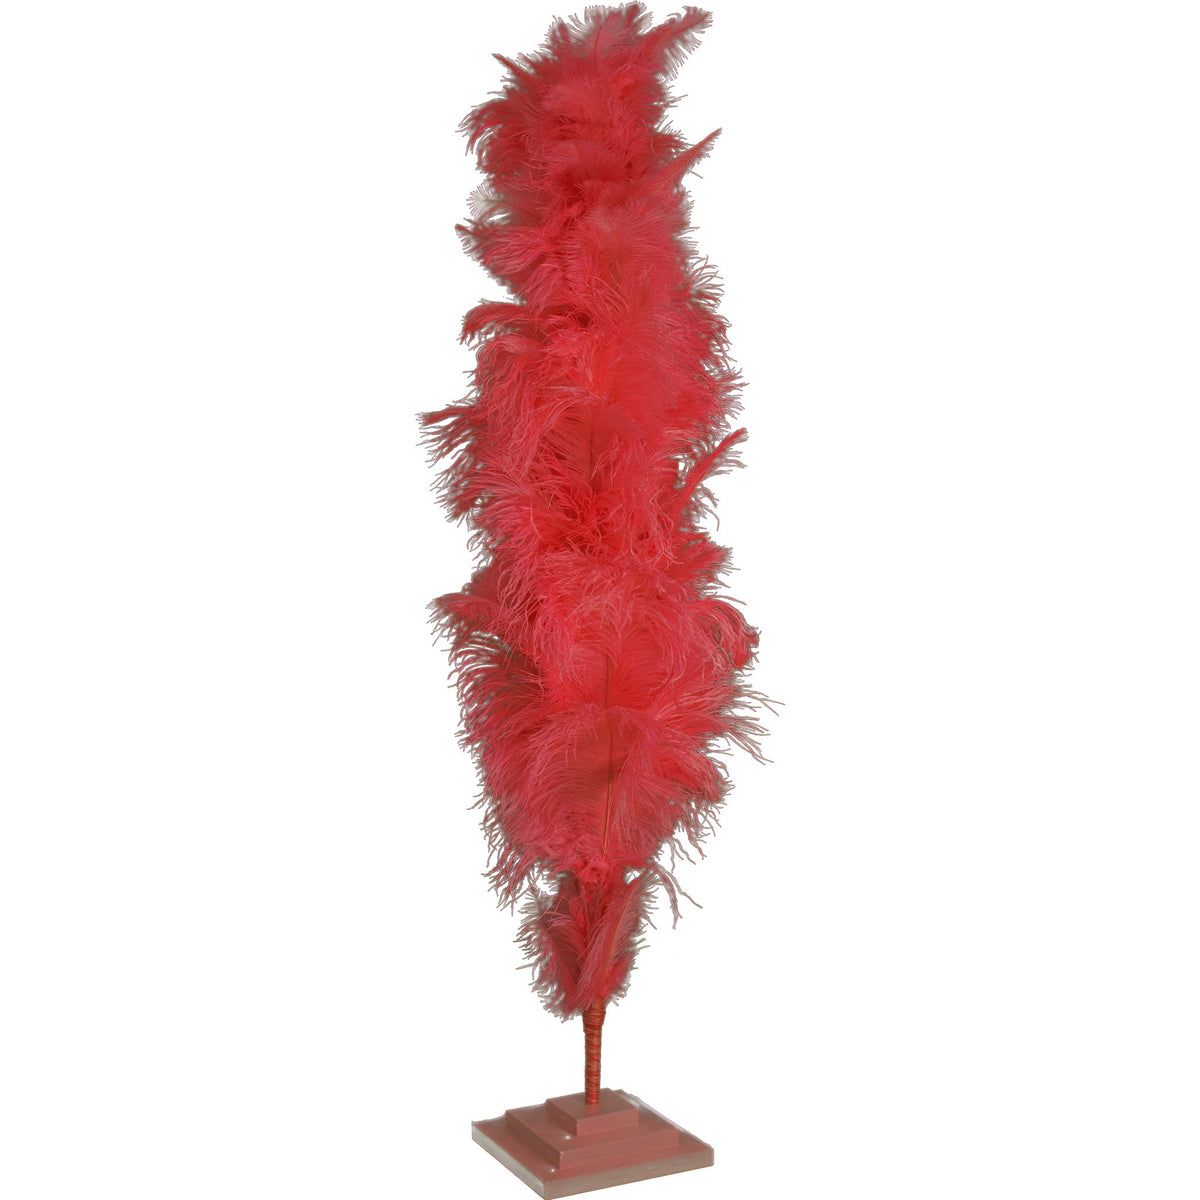 4ft red ostrich feather trees are made for Easy Storage - Strong bendable wire can be wrapped into any type of storage box